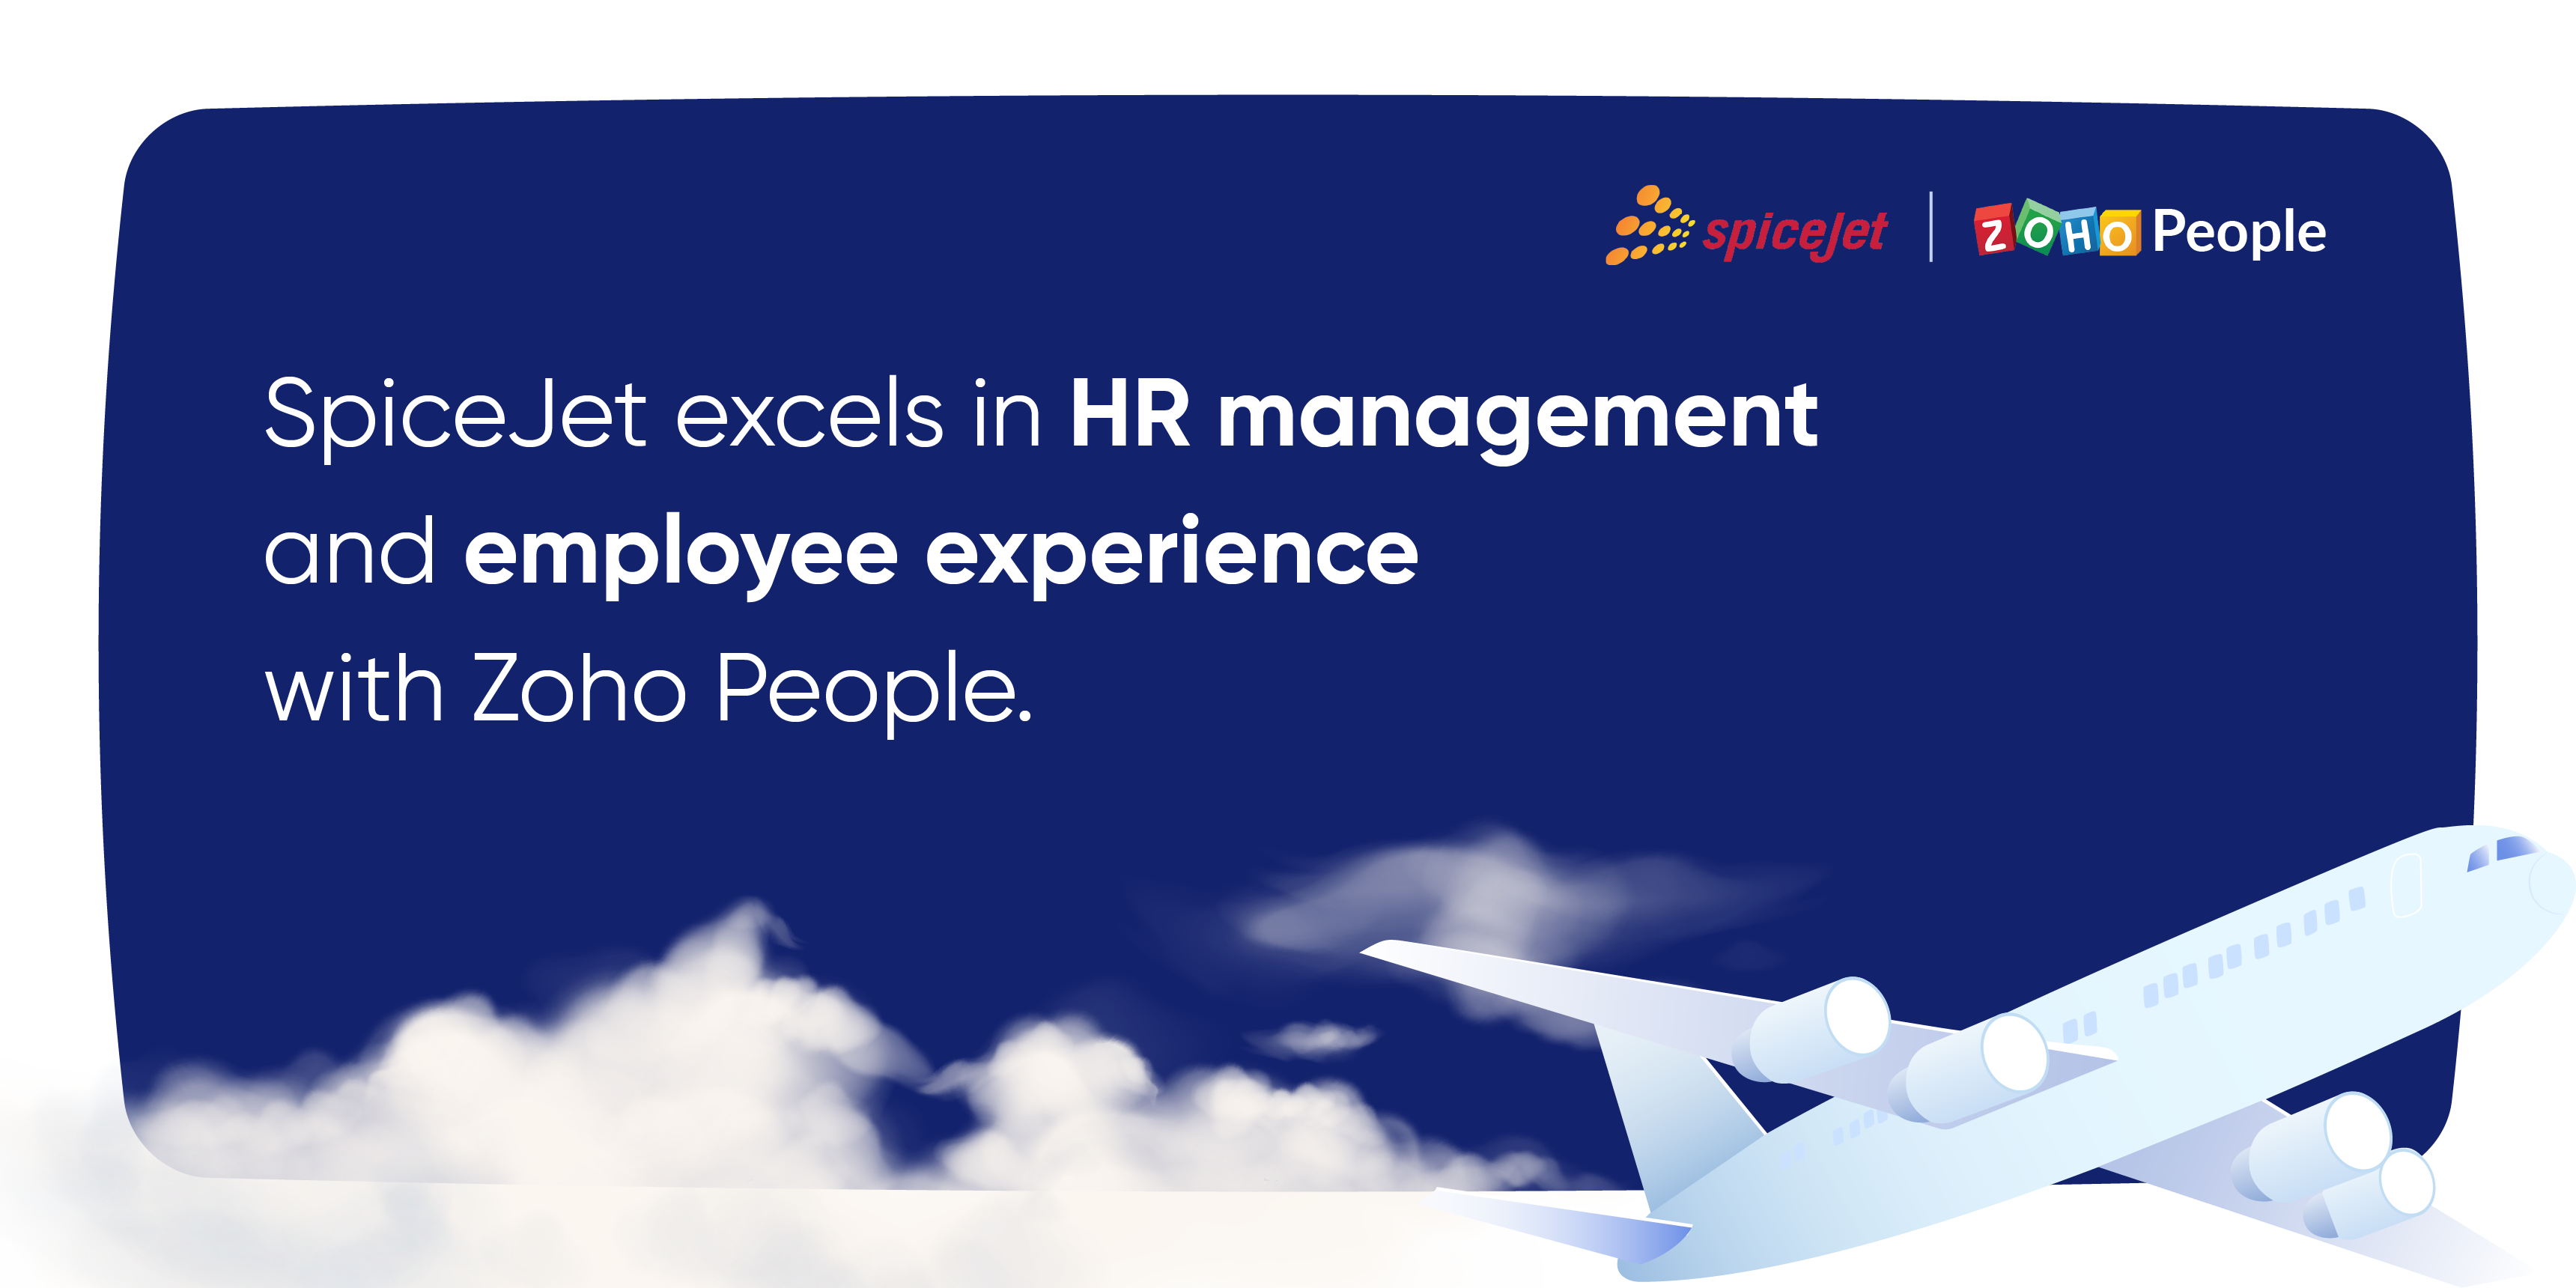 How SpiceJet improved HR management with Zoho People